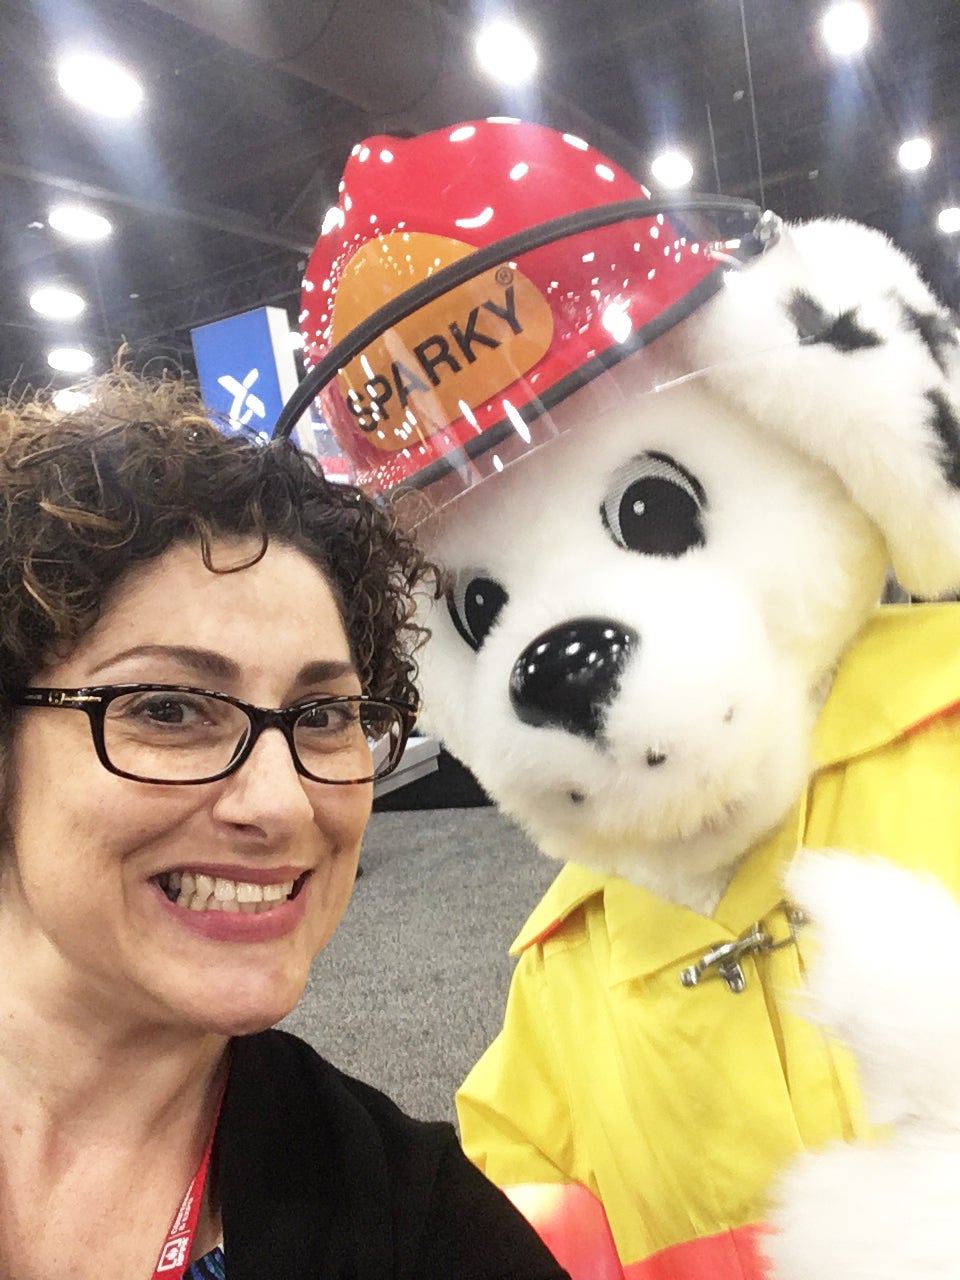 Andrea Vastis, Sr. Director of Public Education at the National Fire Protection Association (NFPA)